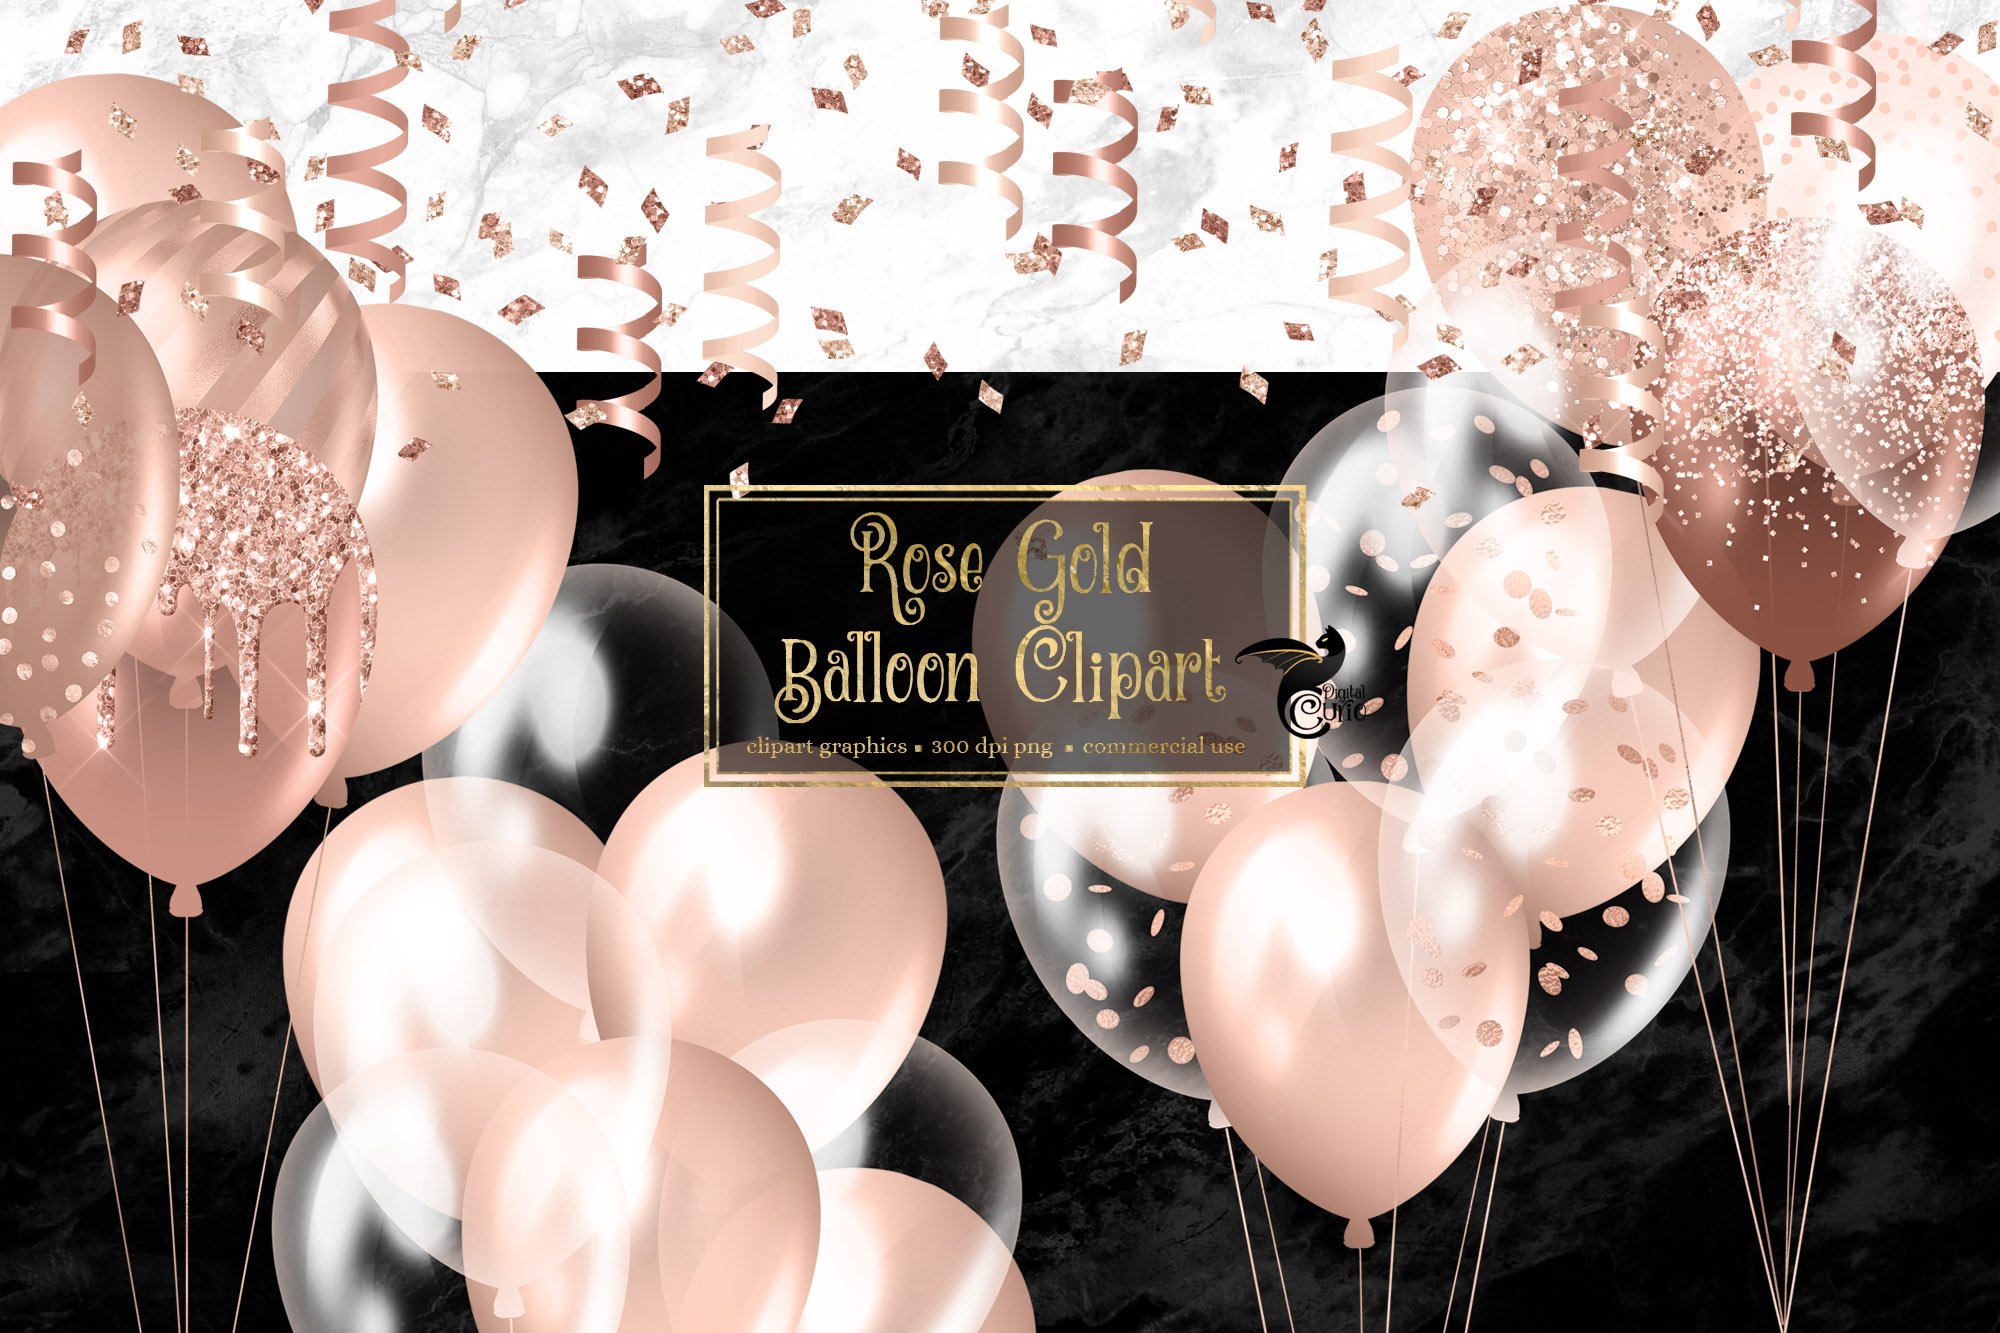 Rose gold balloons collection.